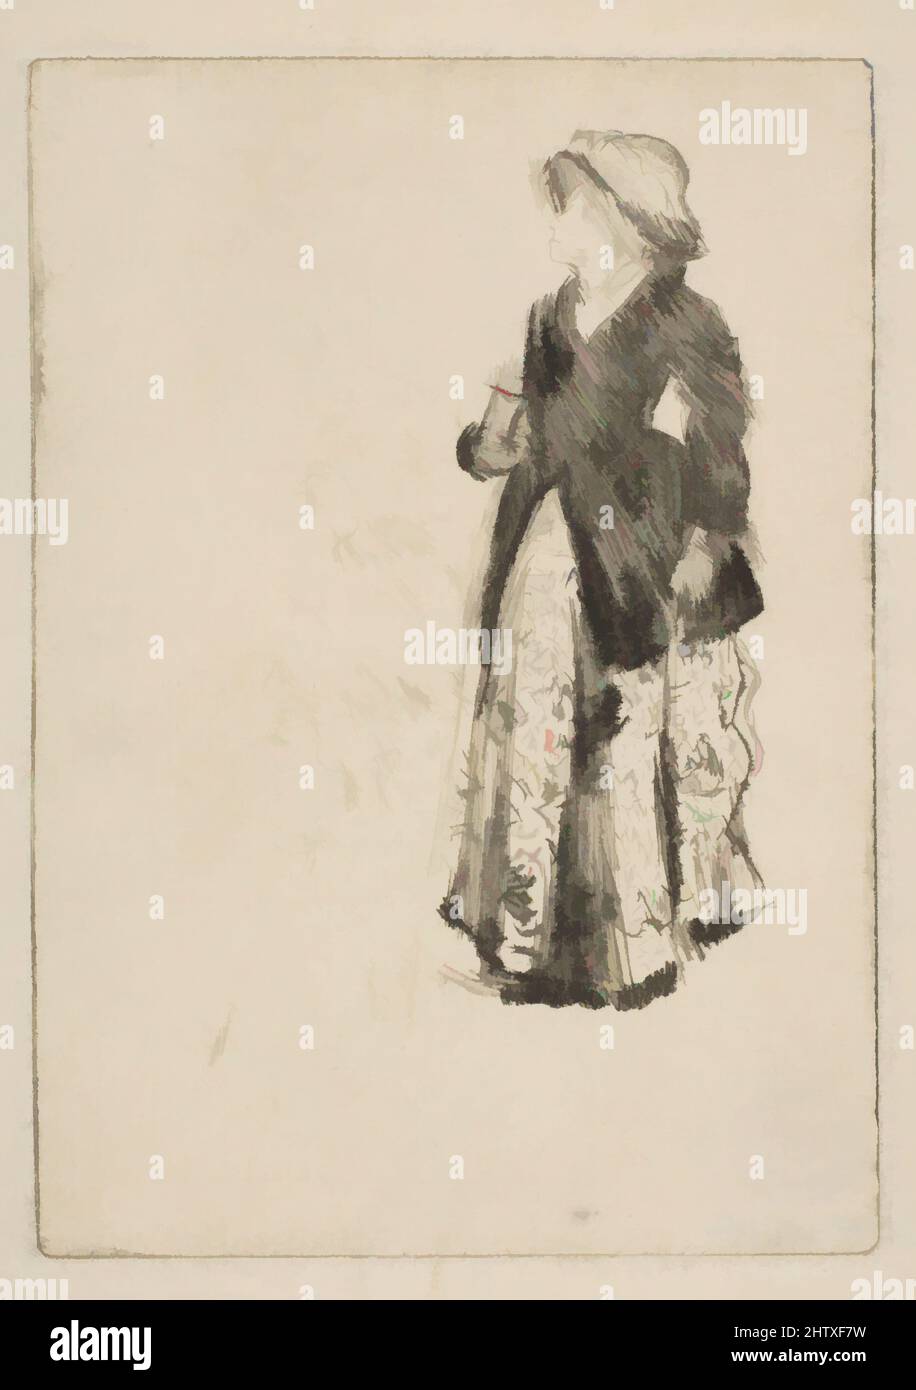 Art inspired by The Actress Ellen Andrée, 1879, Drypoint on laid paper; second state of three (unique impression), sheet: 7 1/8 x 5 in. (18.1 x 12.7 cm), Prints, Edgar Degas (French, Paris 1834–1917 Paris, Classic works modernized by Artotop with a splash of modernity. Shapes, color and value, eye-catching visual impact on art. Emotions through freedom of artworks in a contemporary way. A timeless message pursuing a wildly creative new direction. Artists turning to the digital medium and creating the Artotop NFT Stock Photo